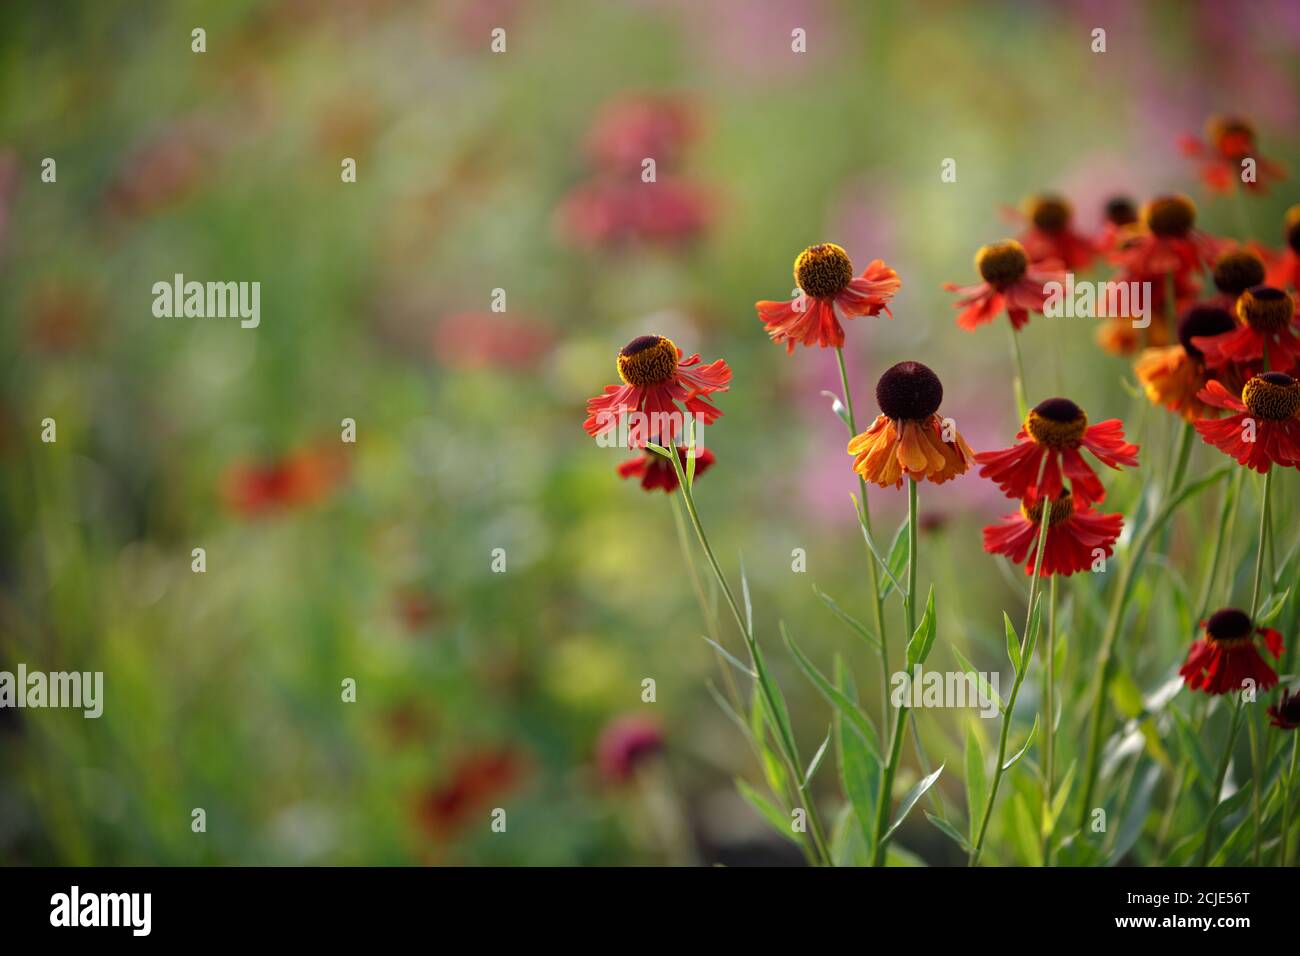 Red Helenium hybrid flowers on a green blurred natural background Stock Photo